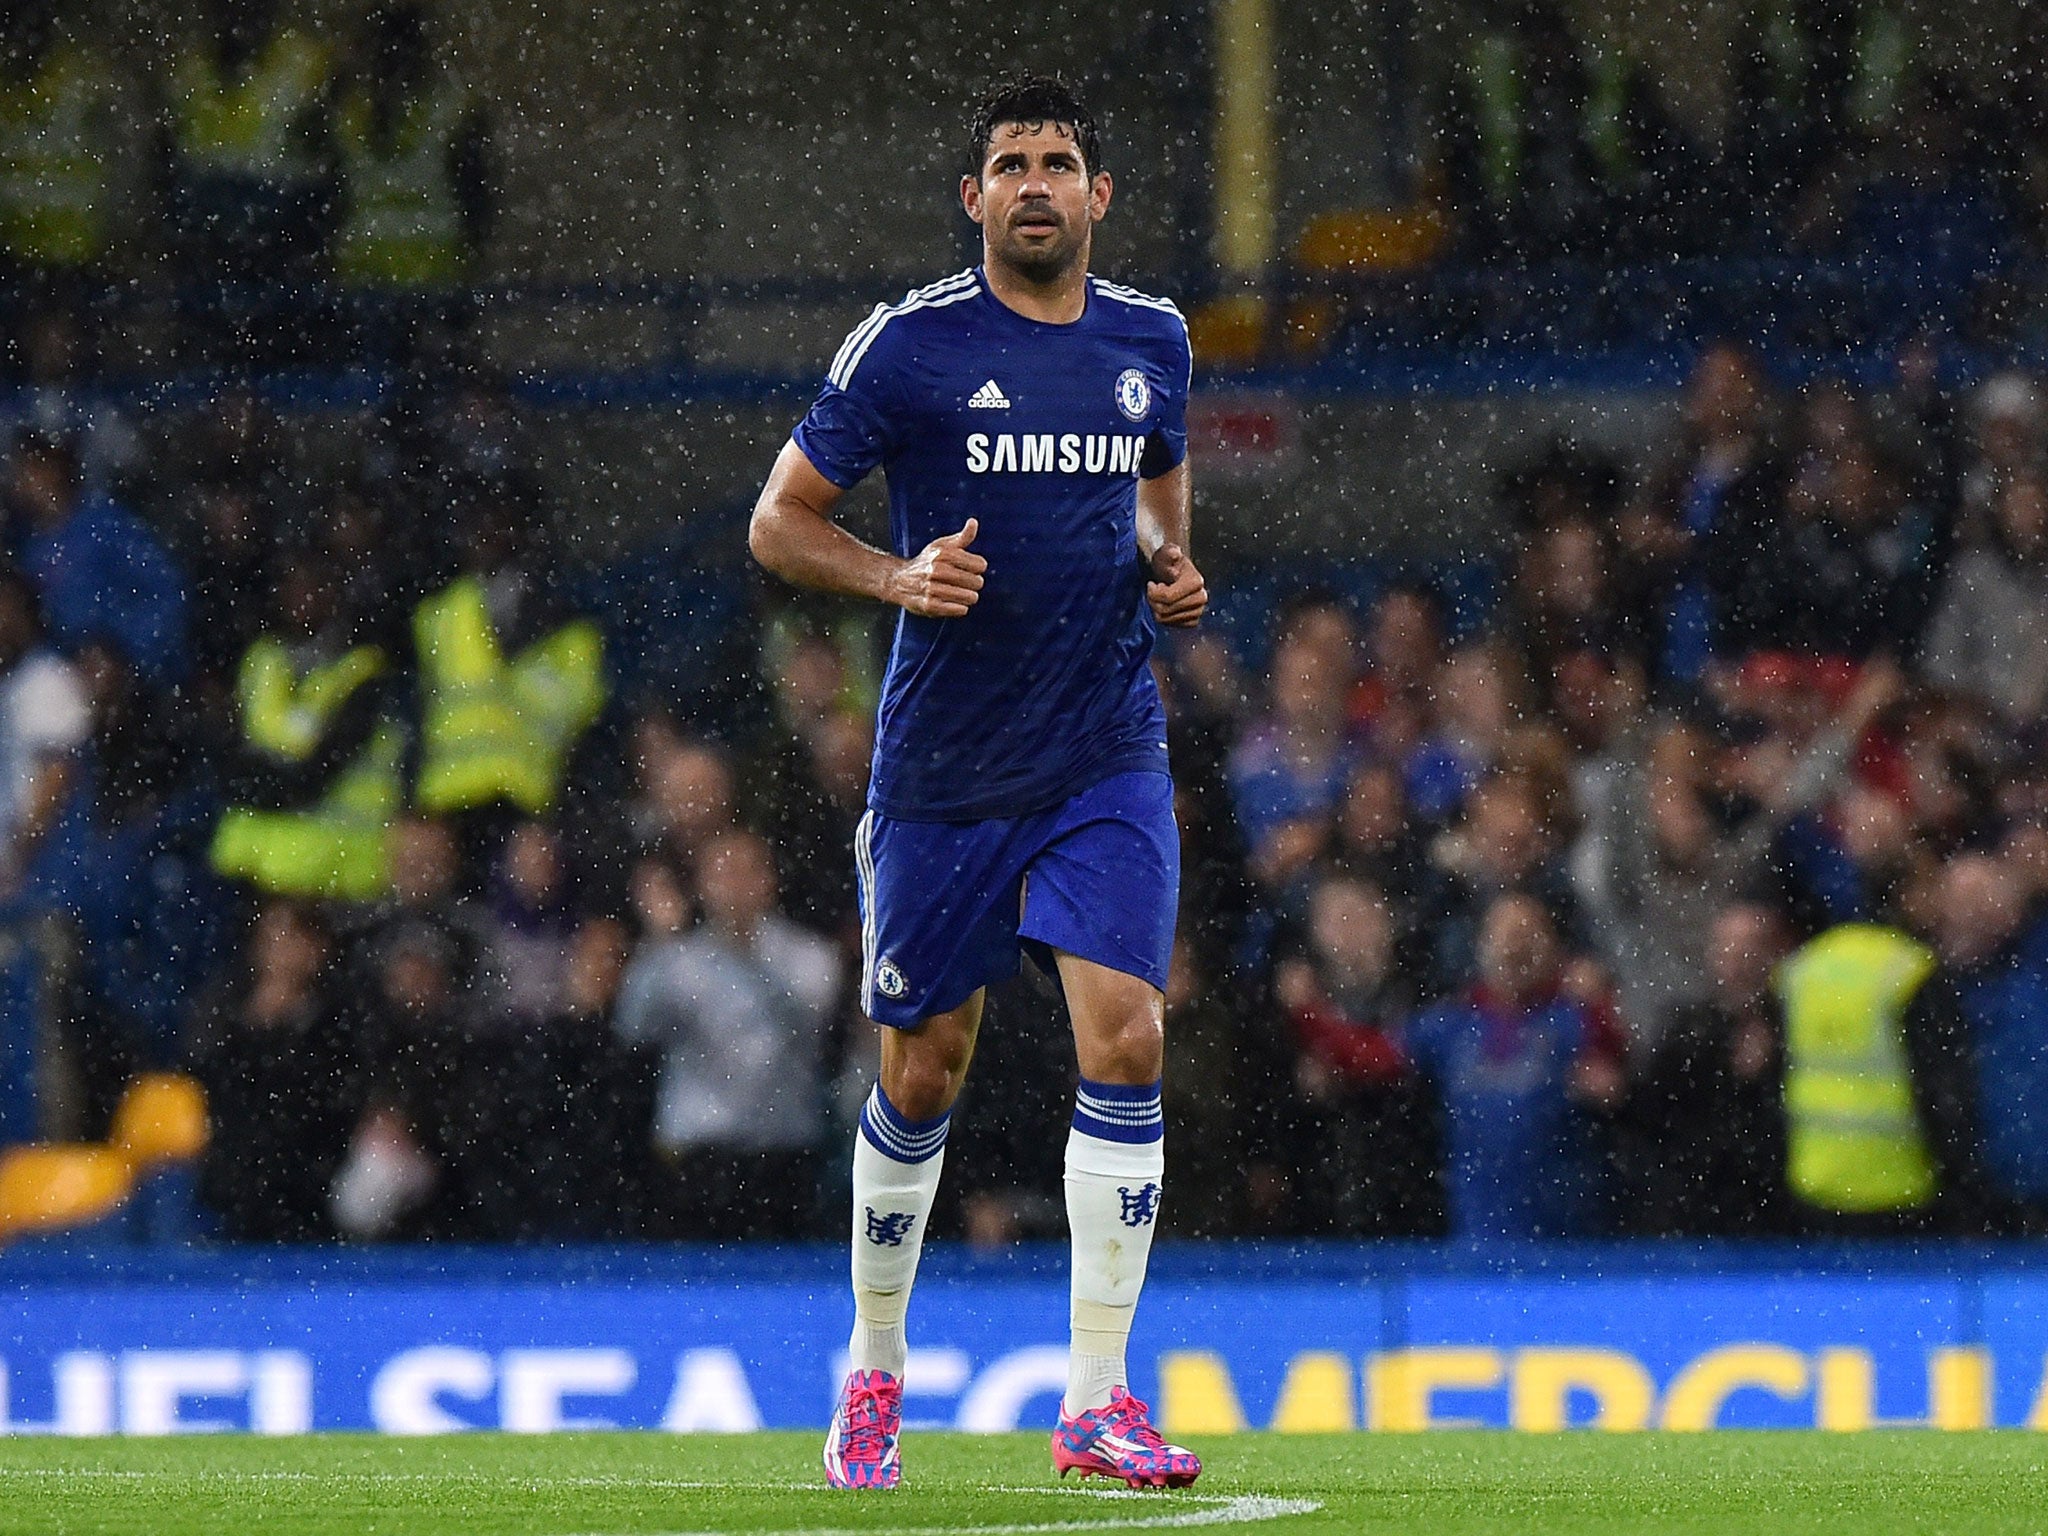 Diego Costa has a minor muscle injury and will be assed